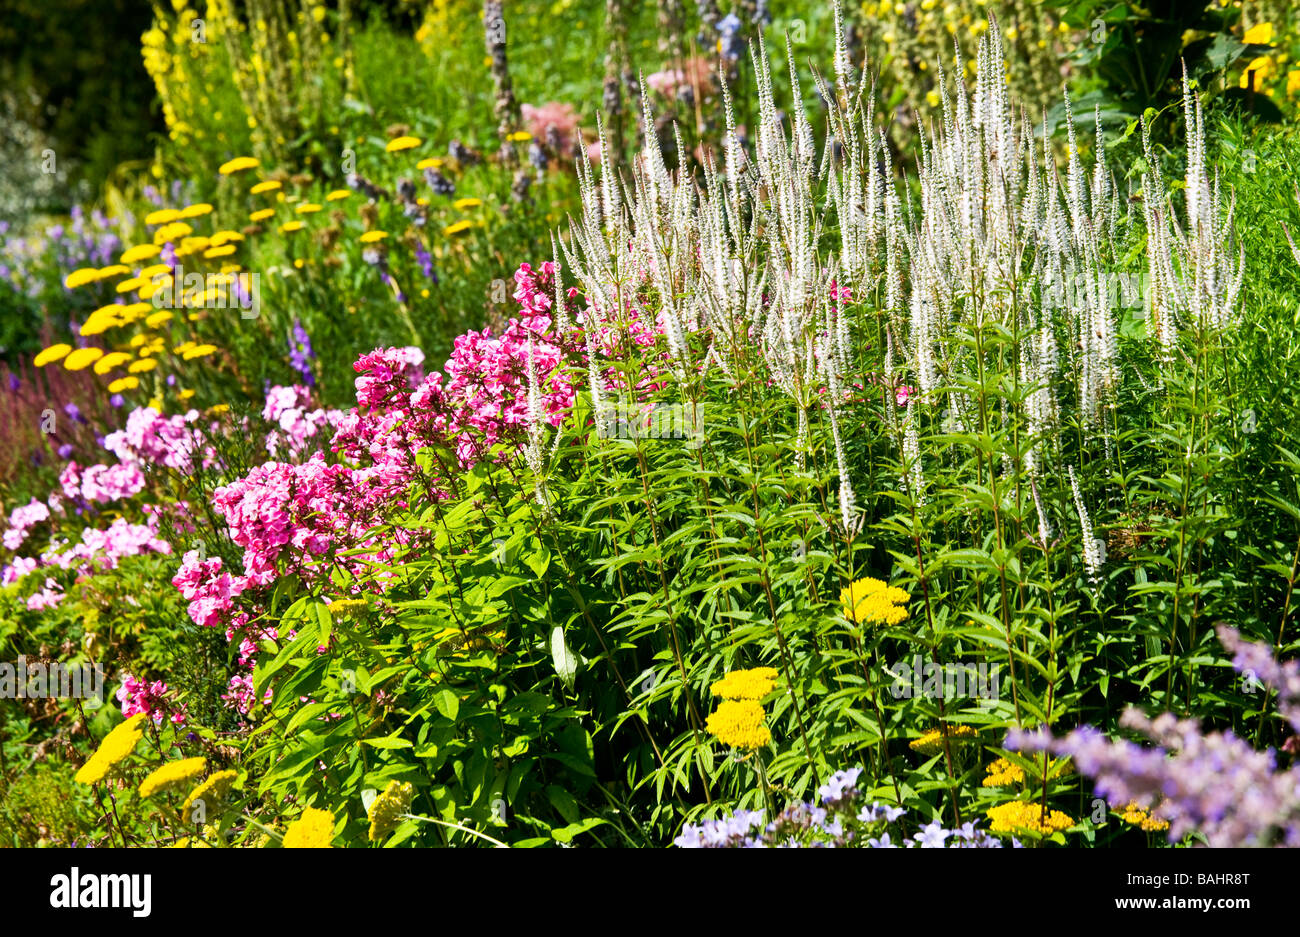 Herbaceous border with white spikes of Veronica or Speedwell pink Phlox and yellow yarrow or Achillea in the background Stock Photo